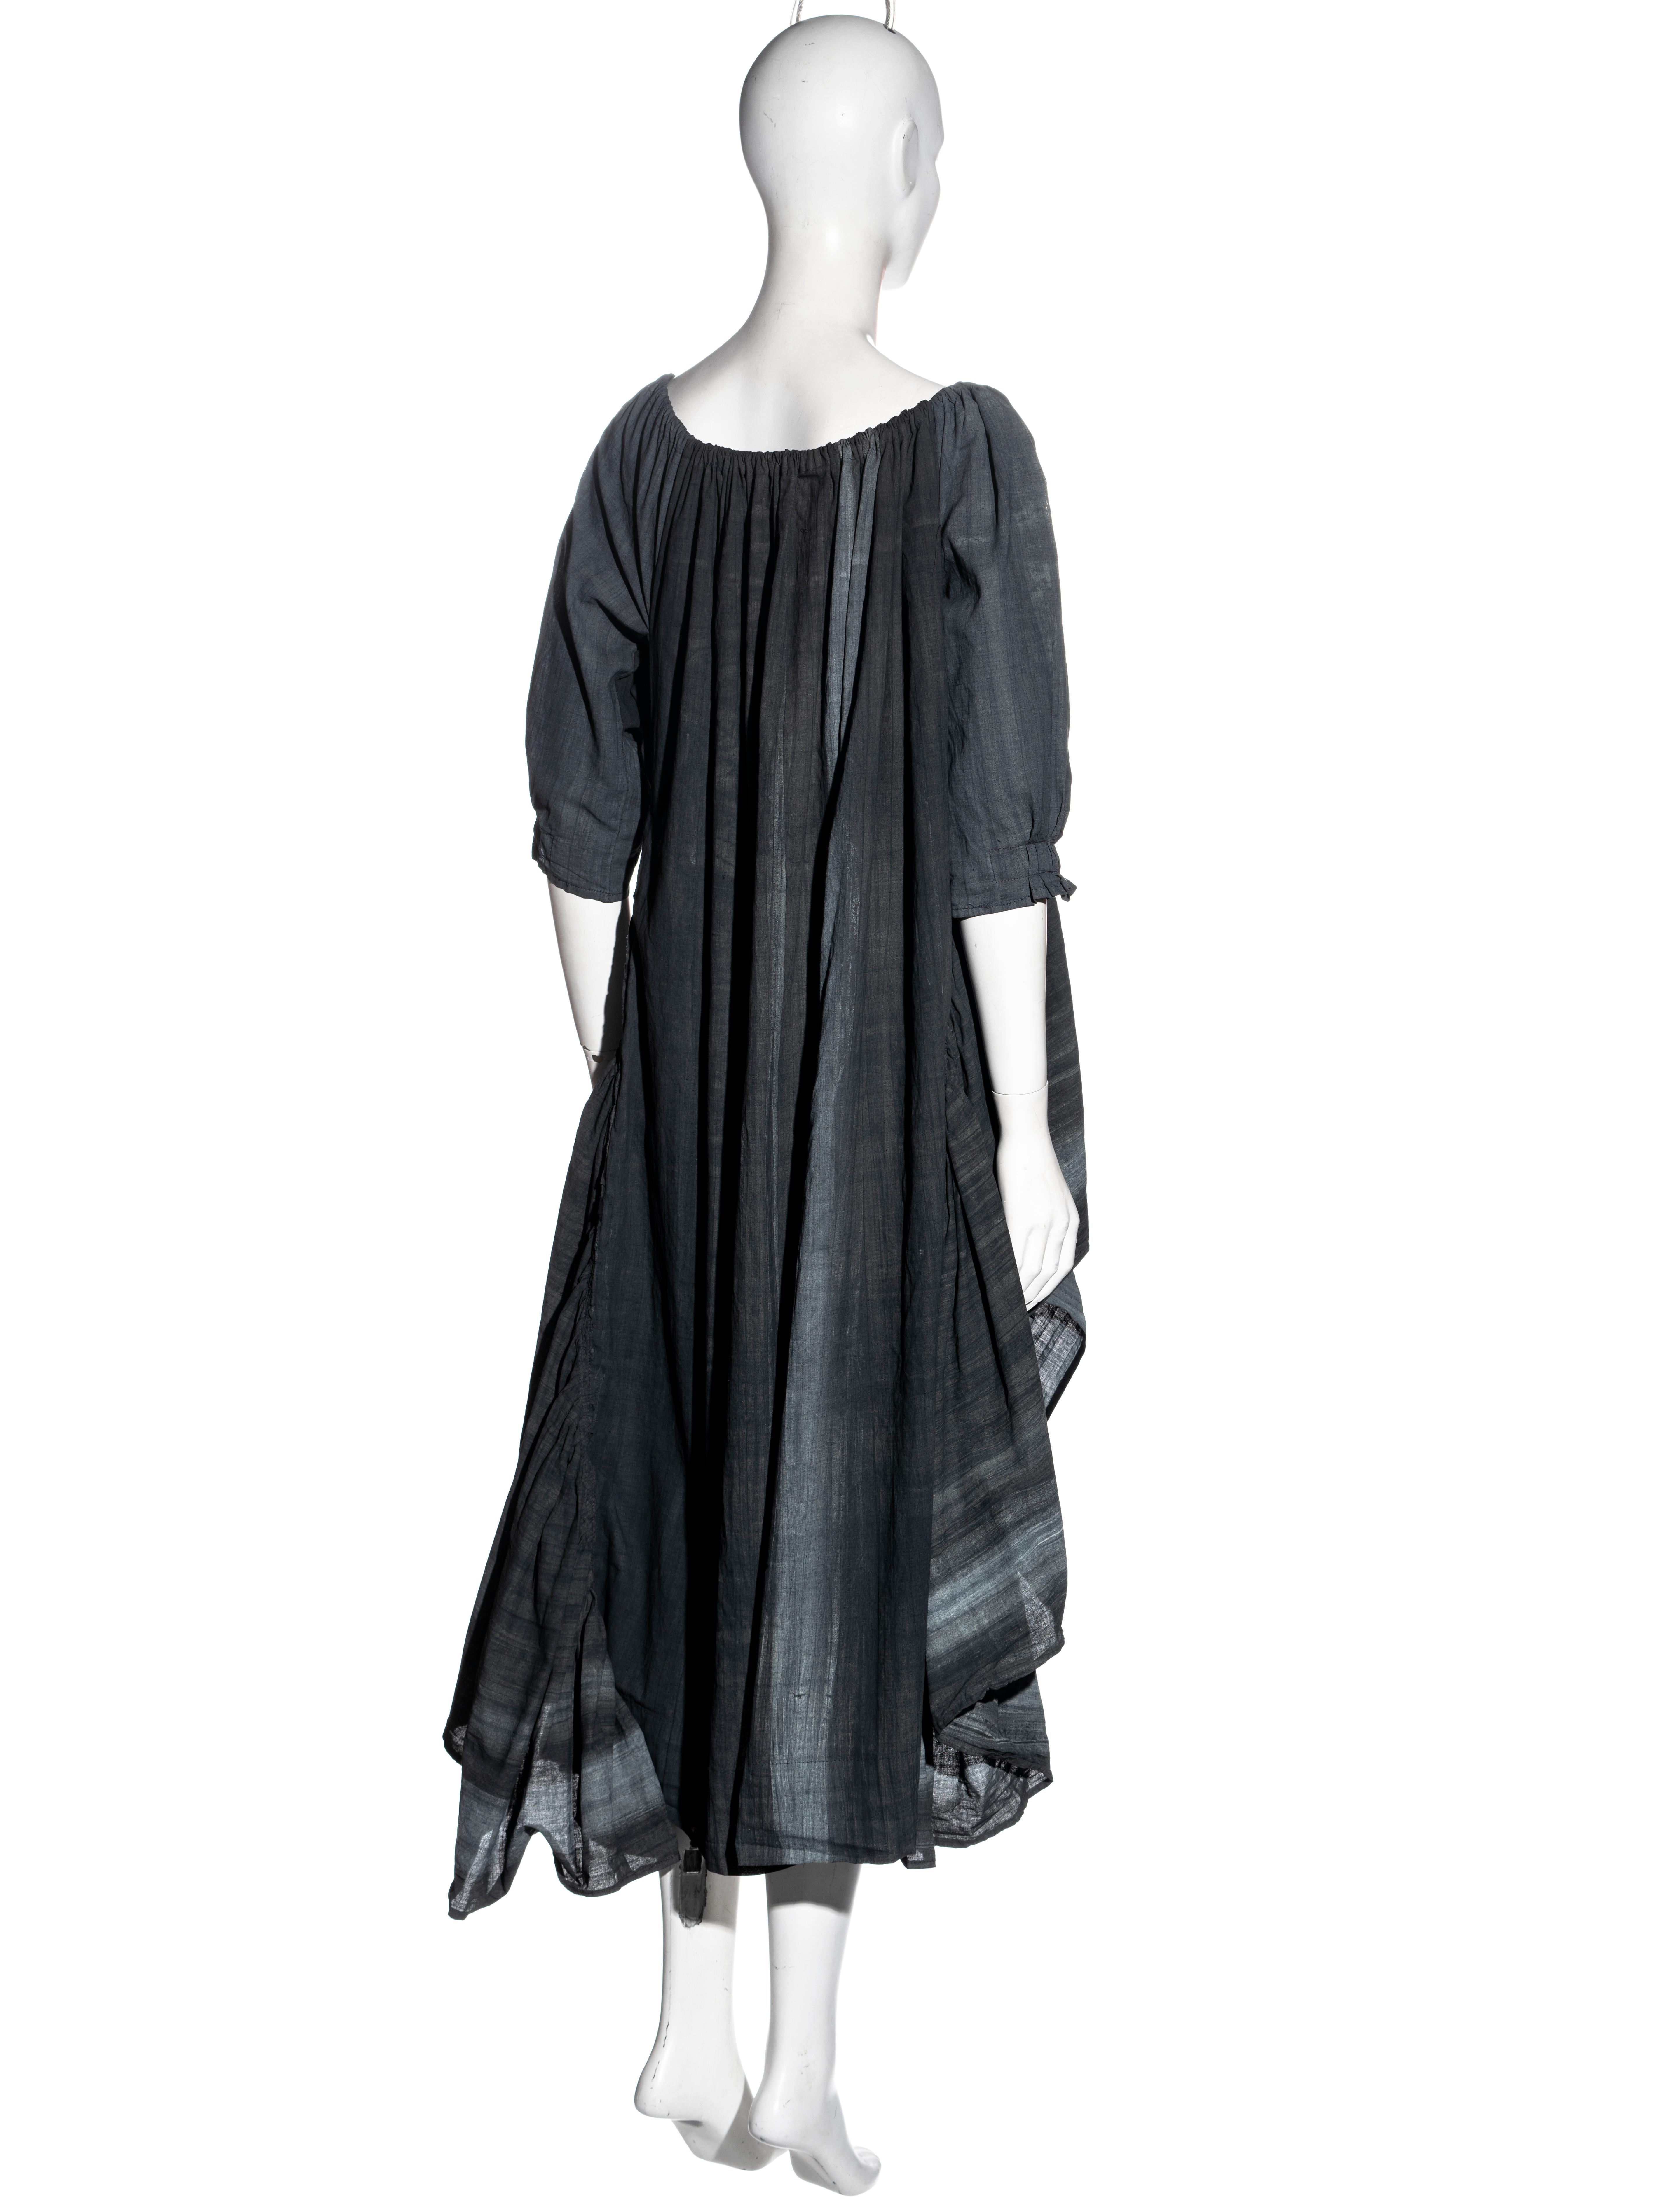 Worlds End by Vivienne Westwood and Malcolm McLaren grey smock dress, ss 1983 For Sale 2